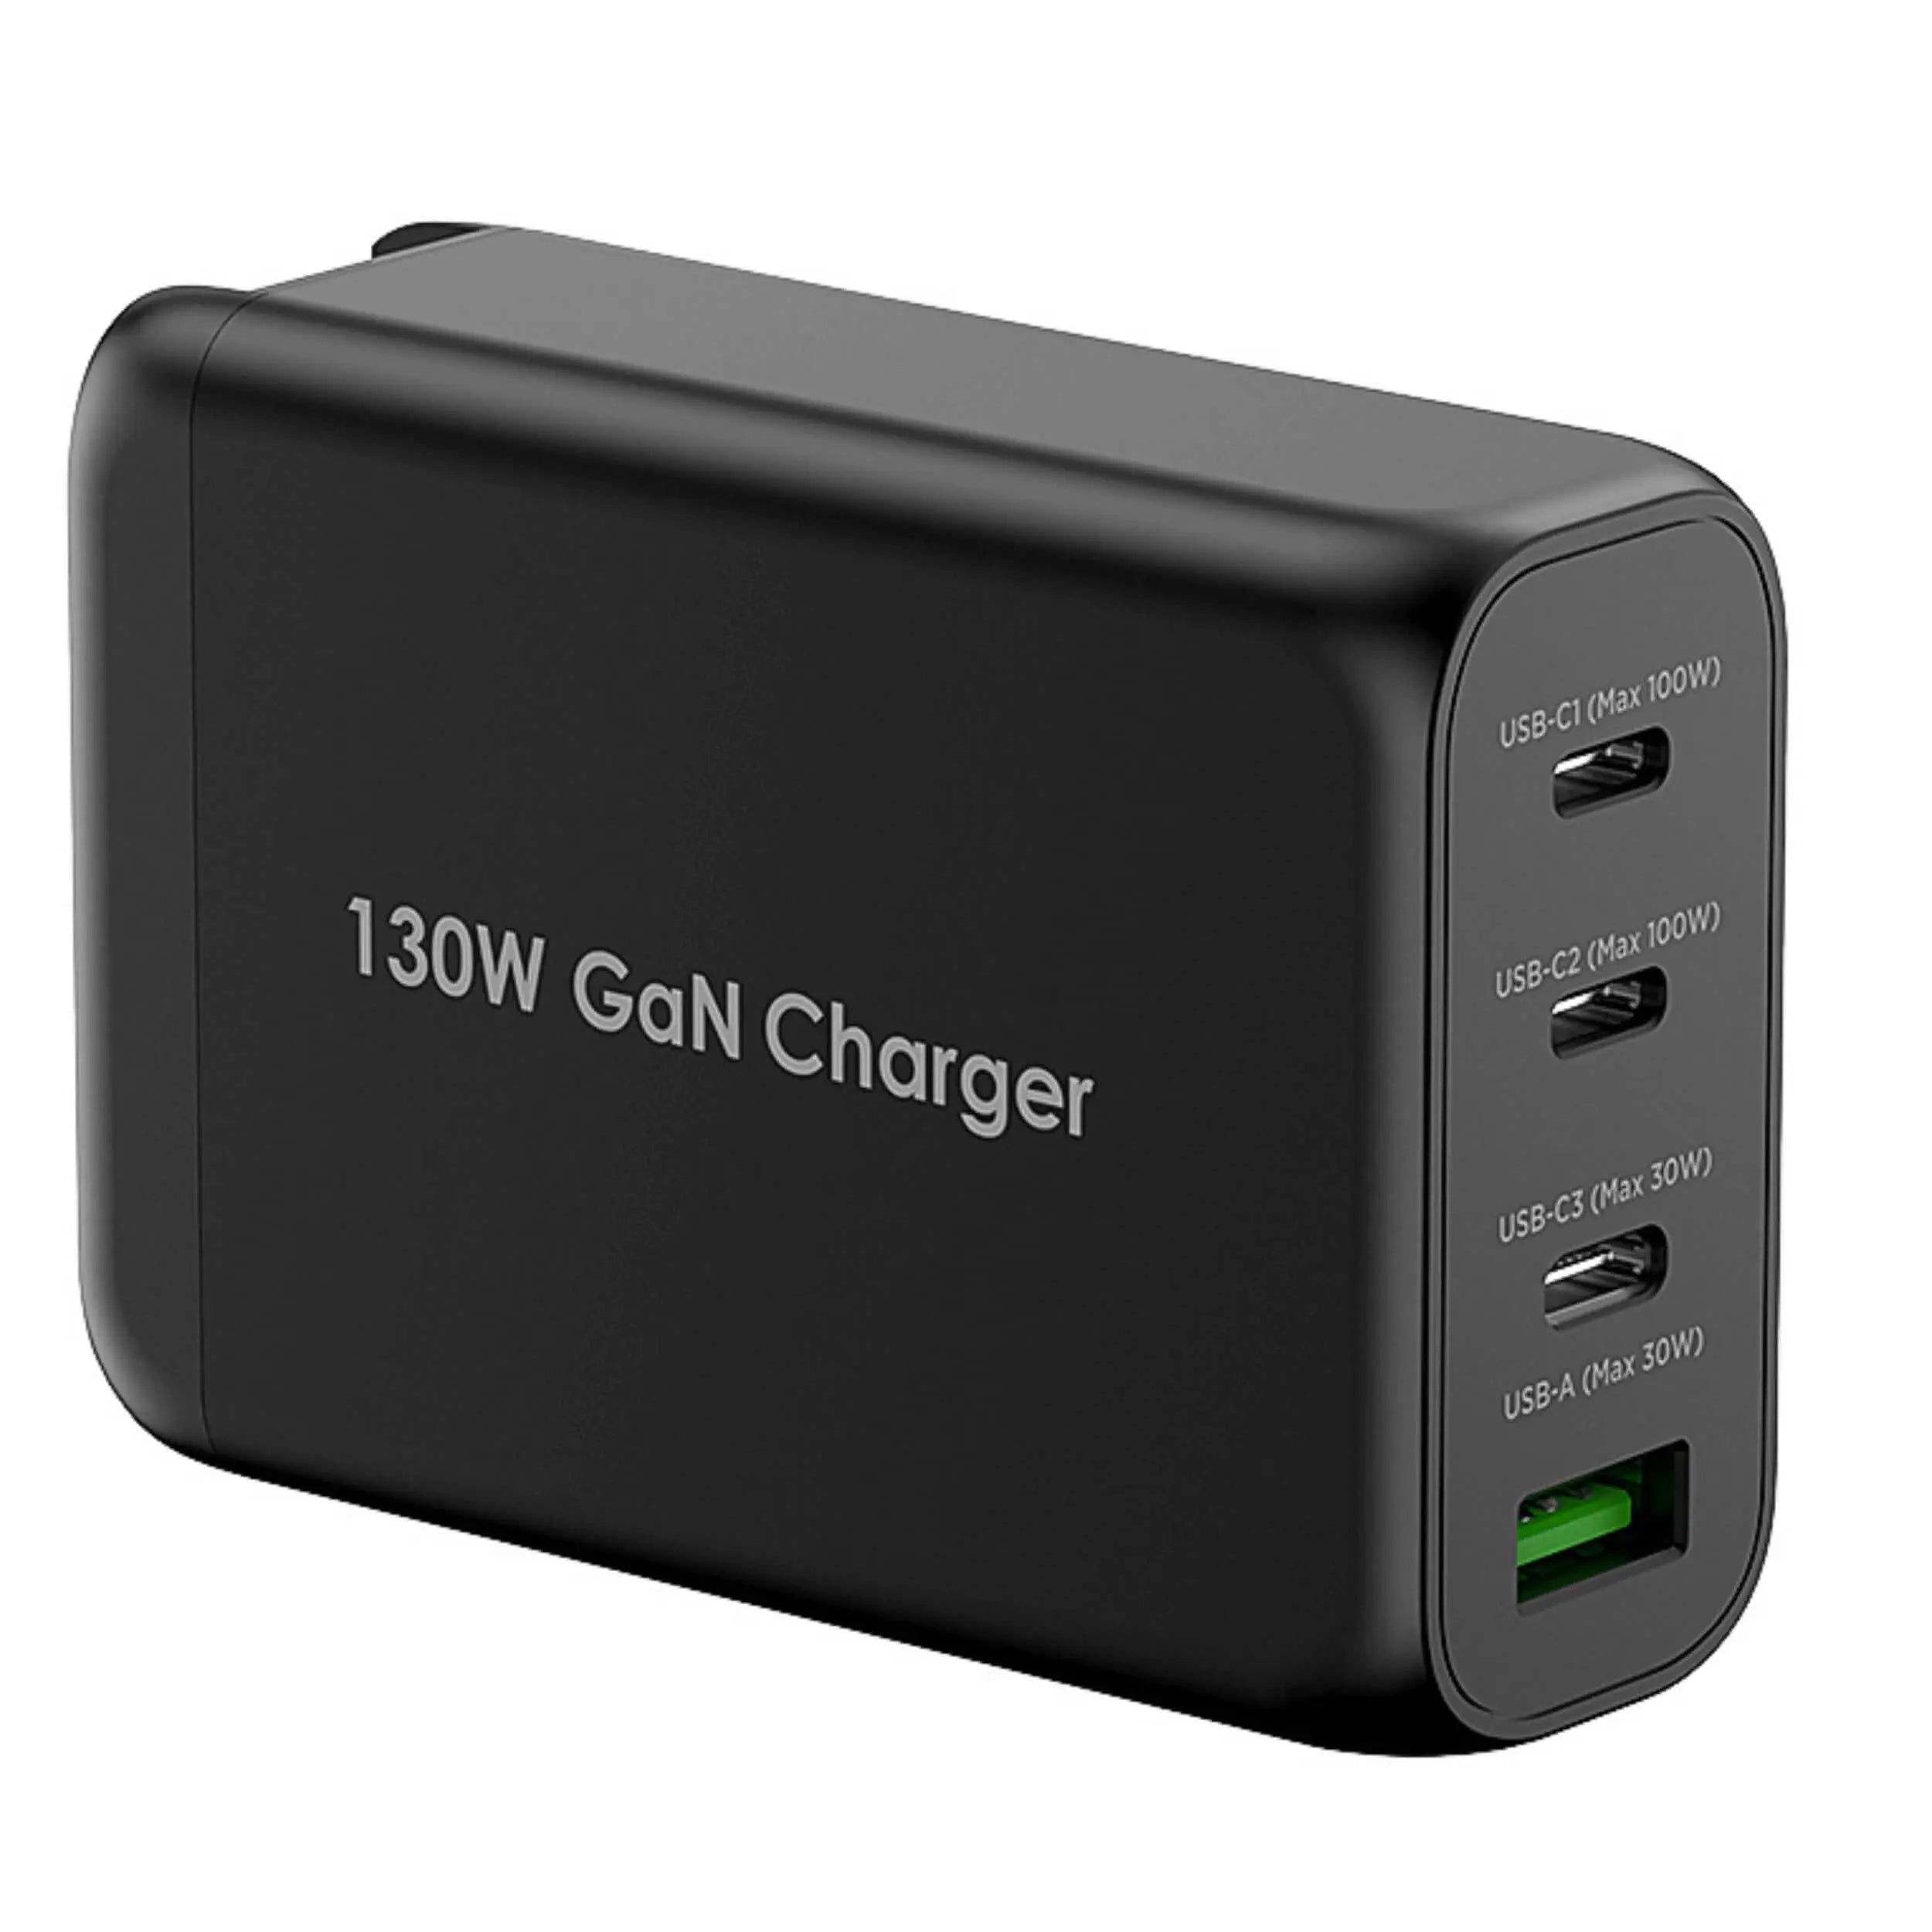 130W GaN USB C Charger for iPhone, MacBook, iPad, 4-Port USB C Charger